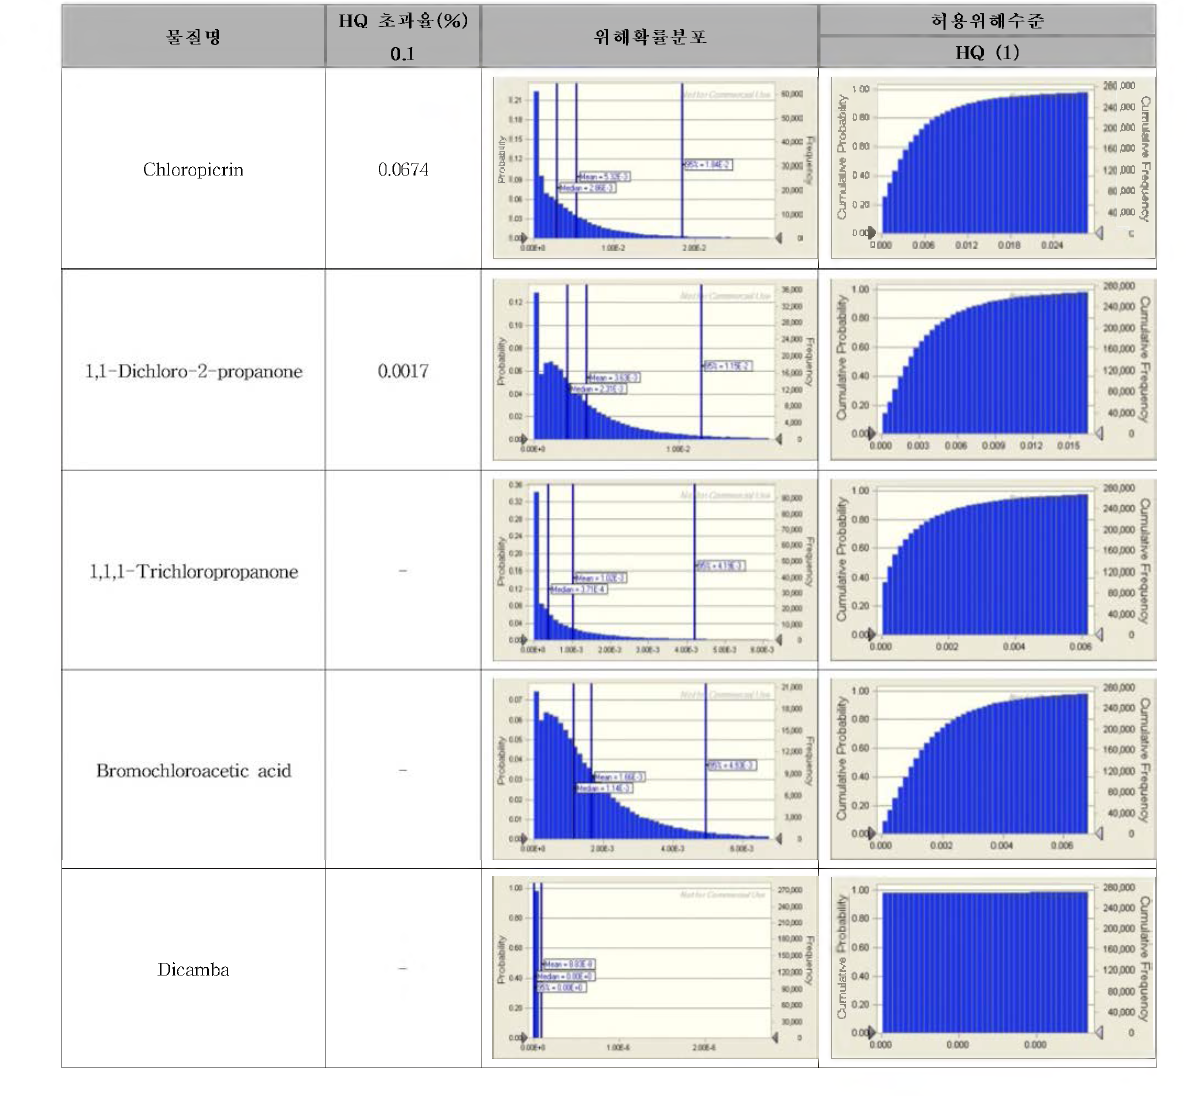 Hazard Quotient(HQ) distributions of non-carcinogens for monitoring concern contaminants list